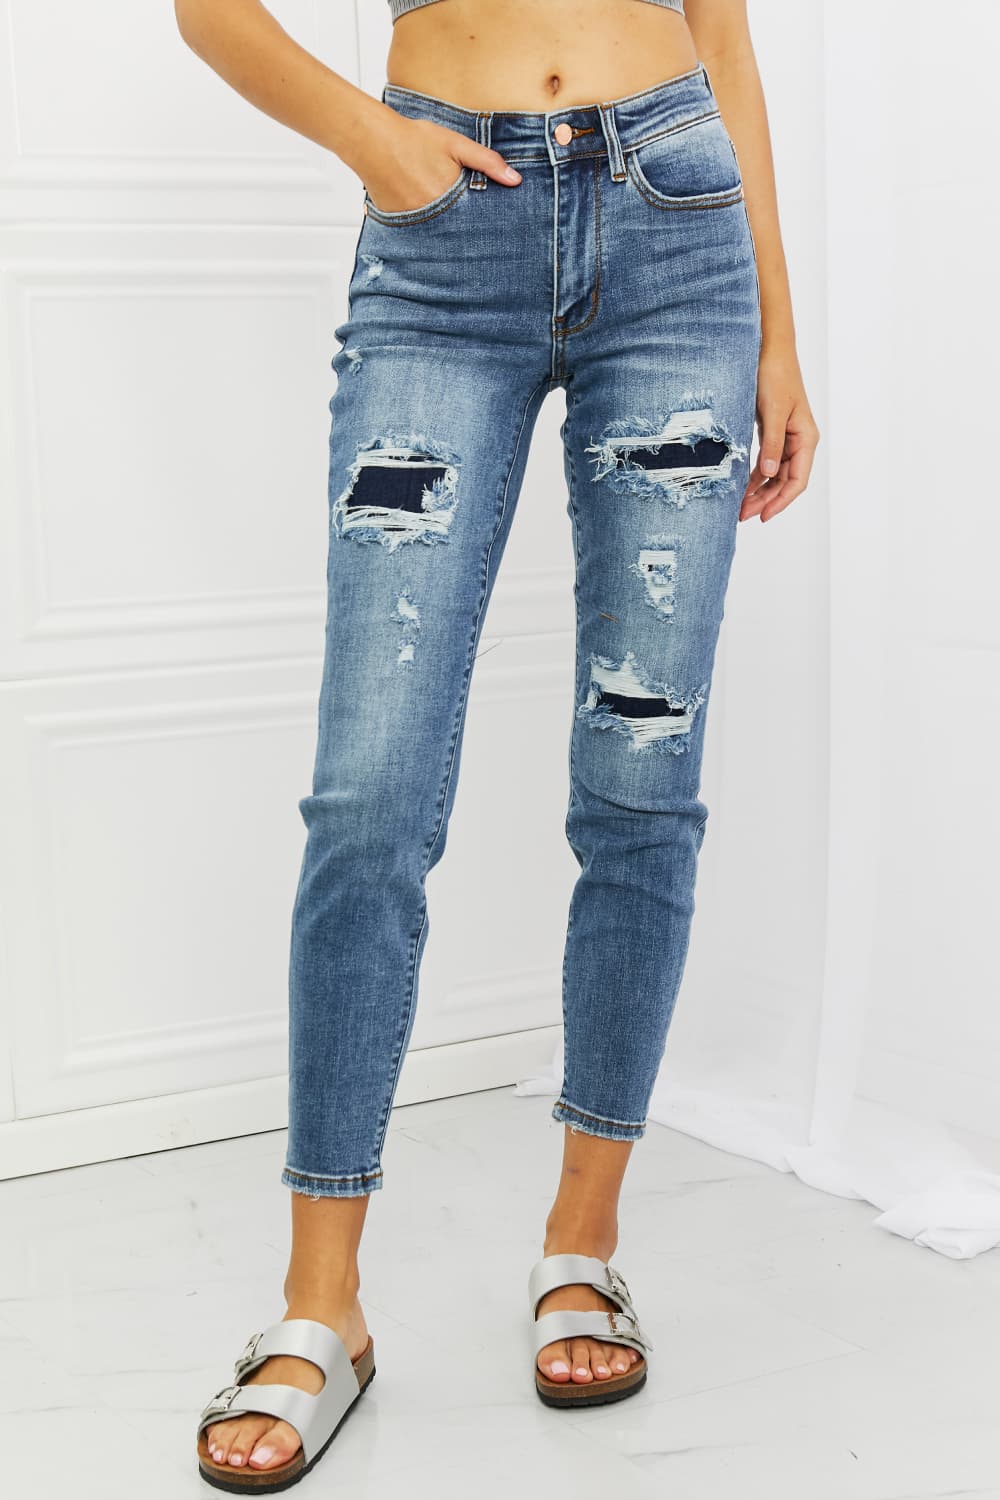 Judy Blue Dahlia Full Size Distressed Patch Jeans Print on any thing USA/STOD clothes